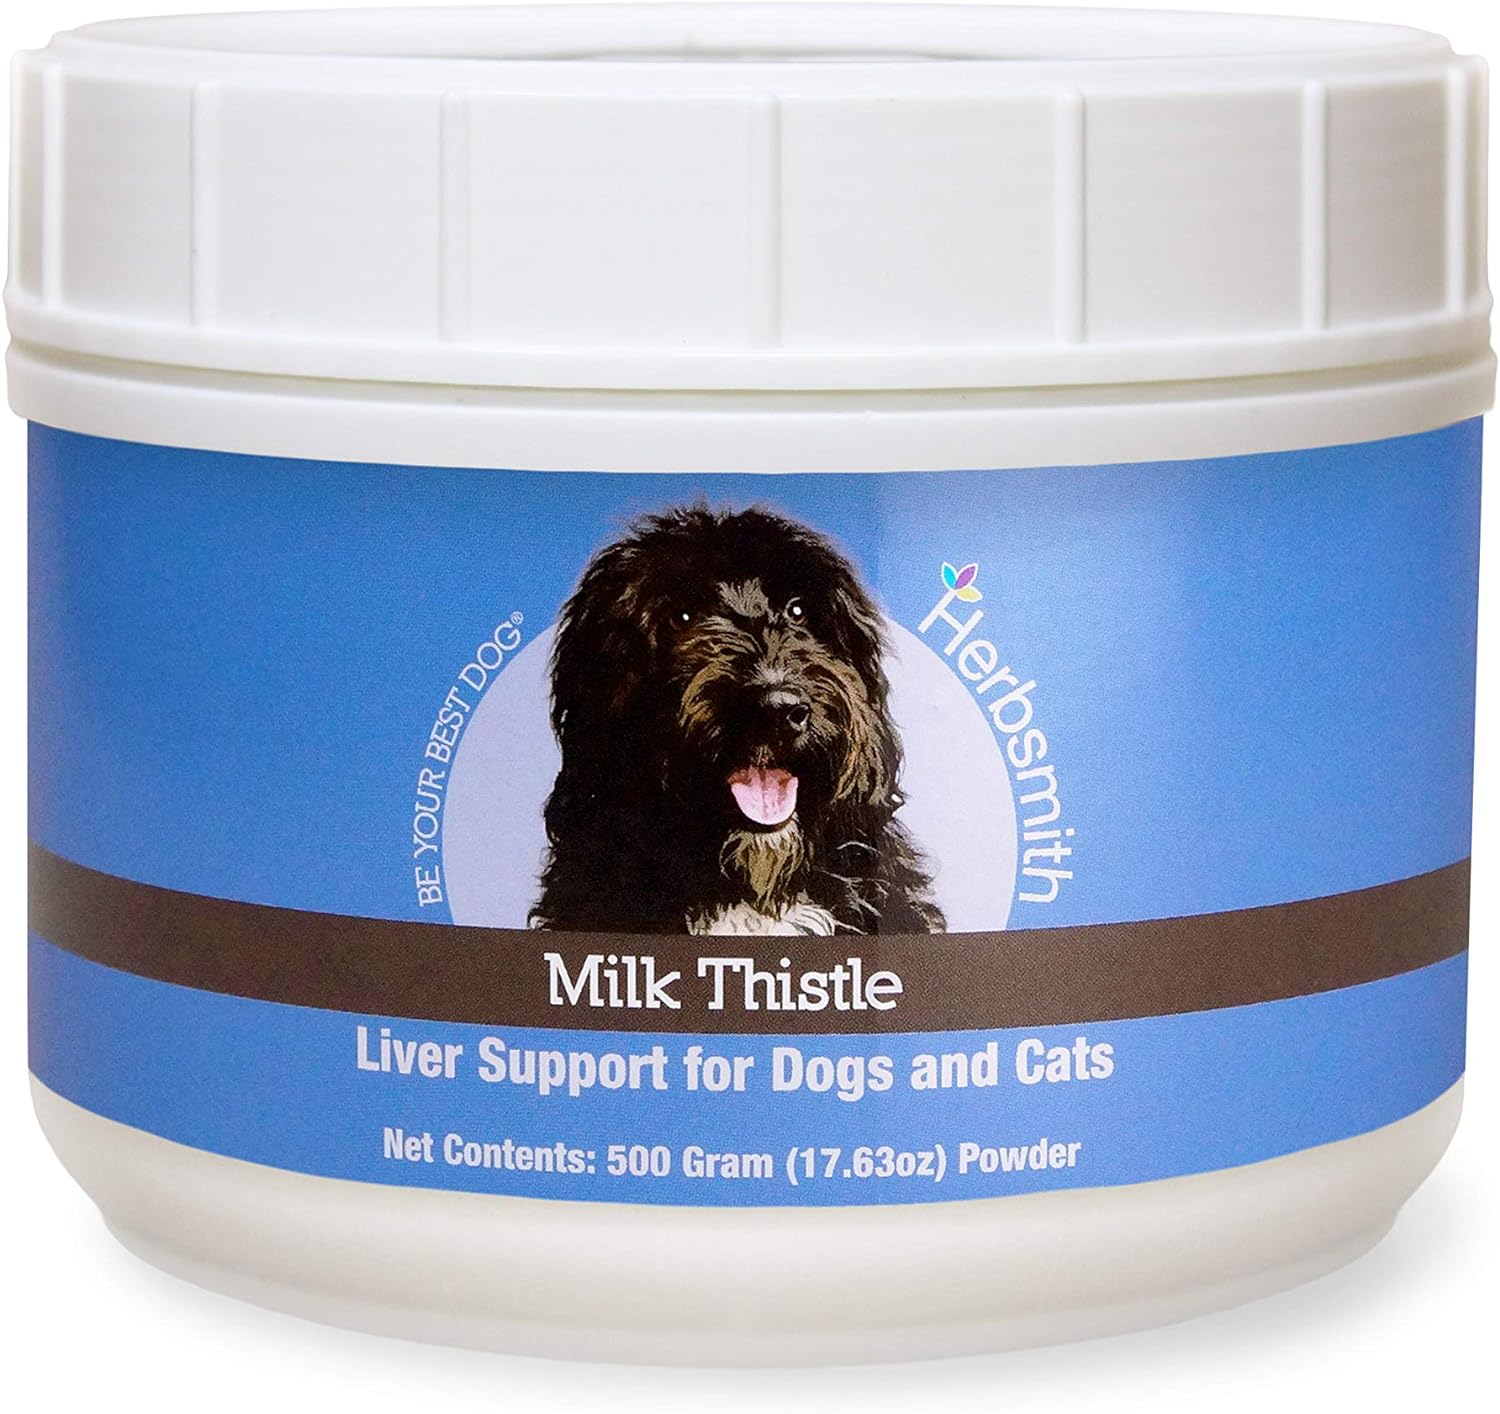 Herbsmith Organic Milk Thistle for Dogs and Cats – Liver Supplement for Dogs & Cats – Made in USA – 500g Powder